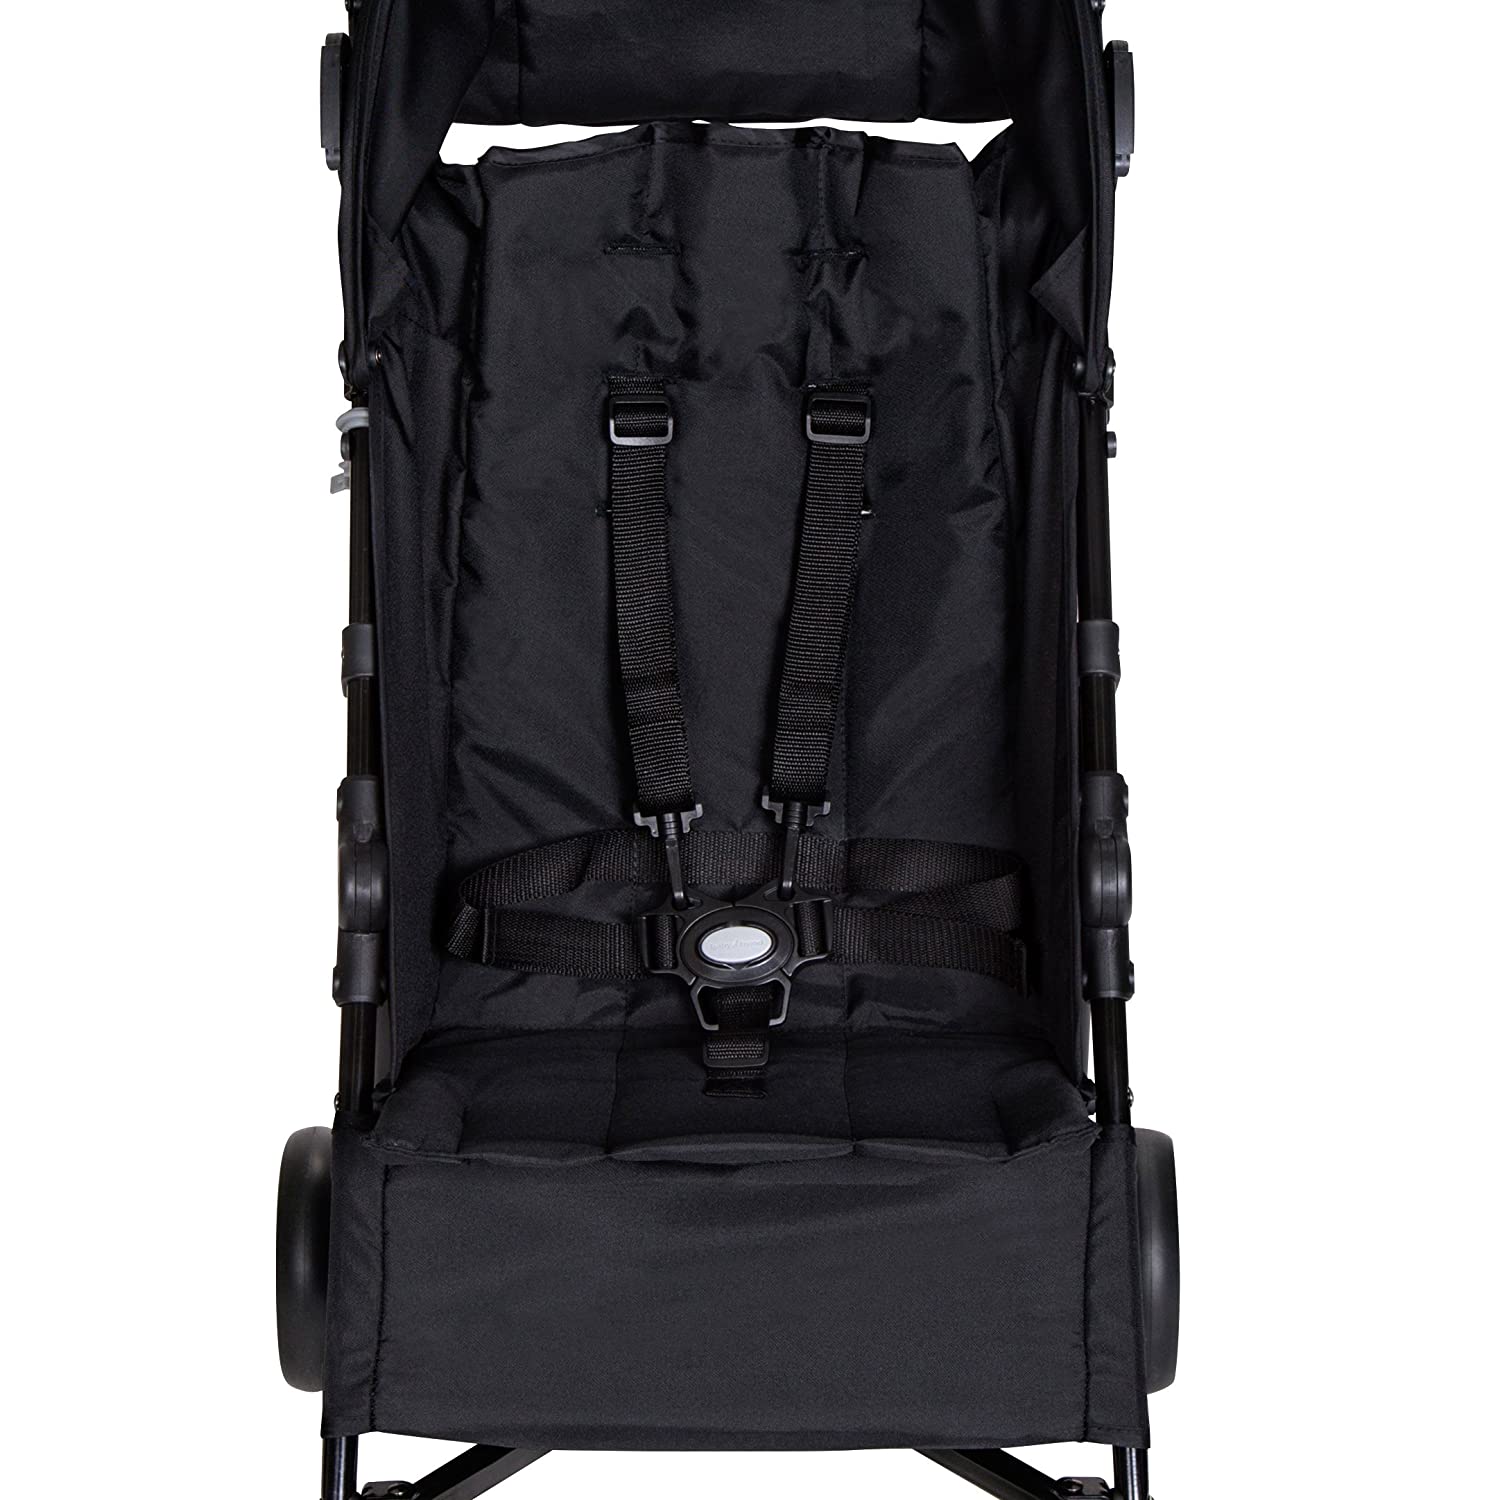 Baby Trend Rocket Lightweight Stroller, Princeton, Black 50lbs Dual foot activated parking brake and a parent organizer with 2 cup holders Large canopy and basket; Baby trend rocket stroller will accommodate your growing child up to 50 pounds- 9001402036